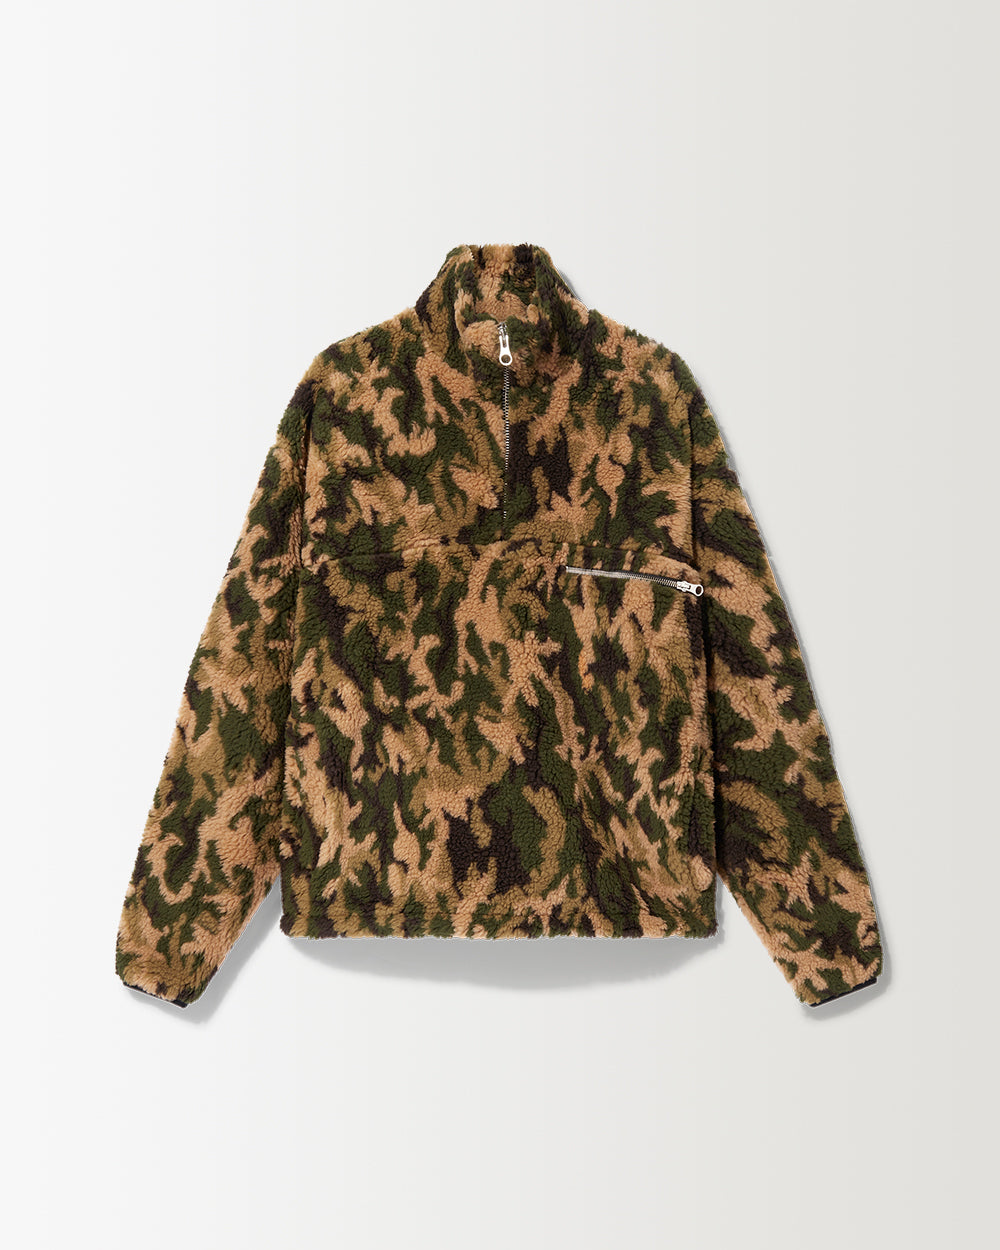 Seclusion Fleece - Forest Camo